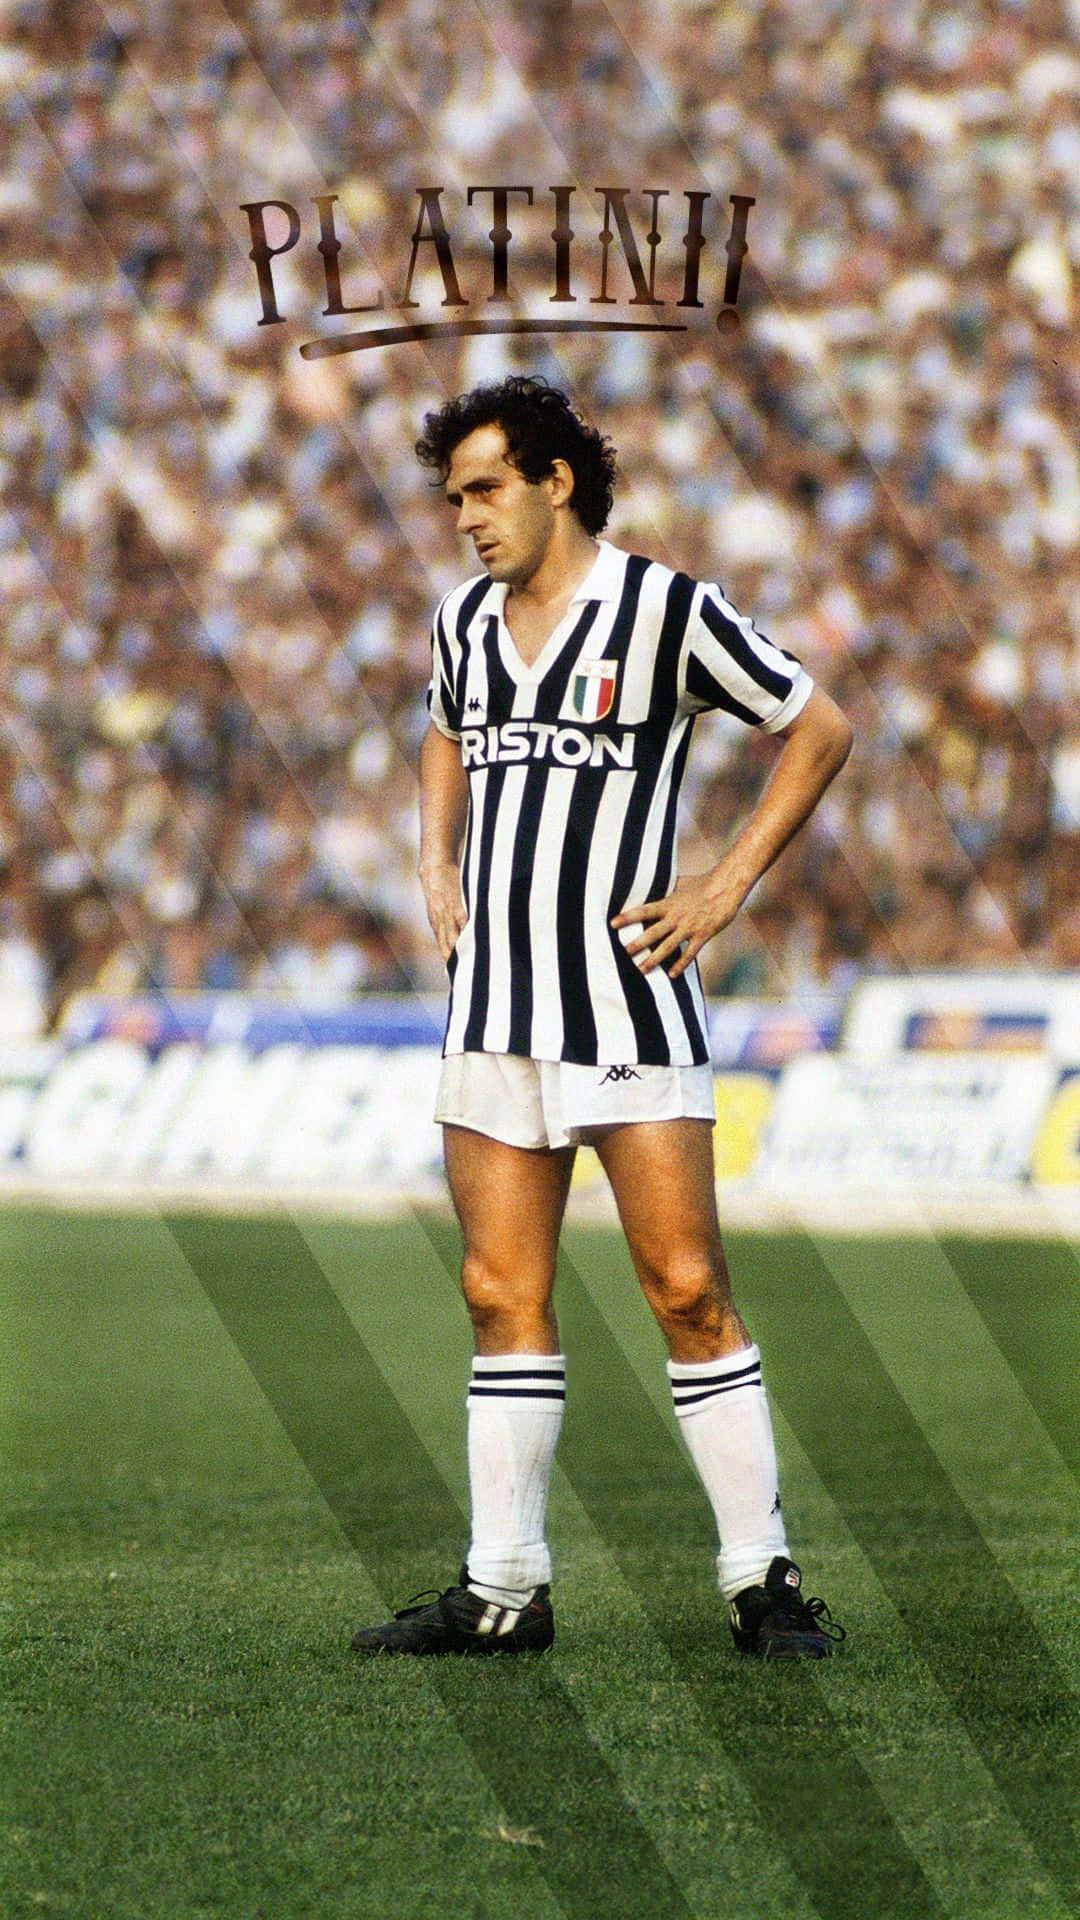 Michel Platini - The Football Superstar in Action Wallpaper